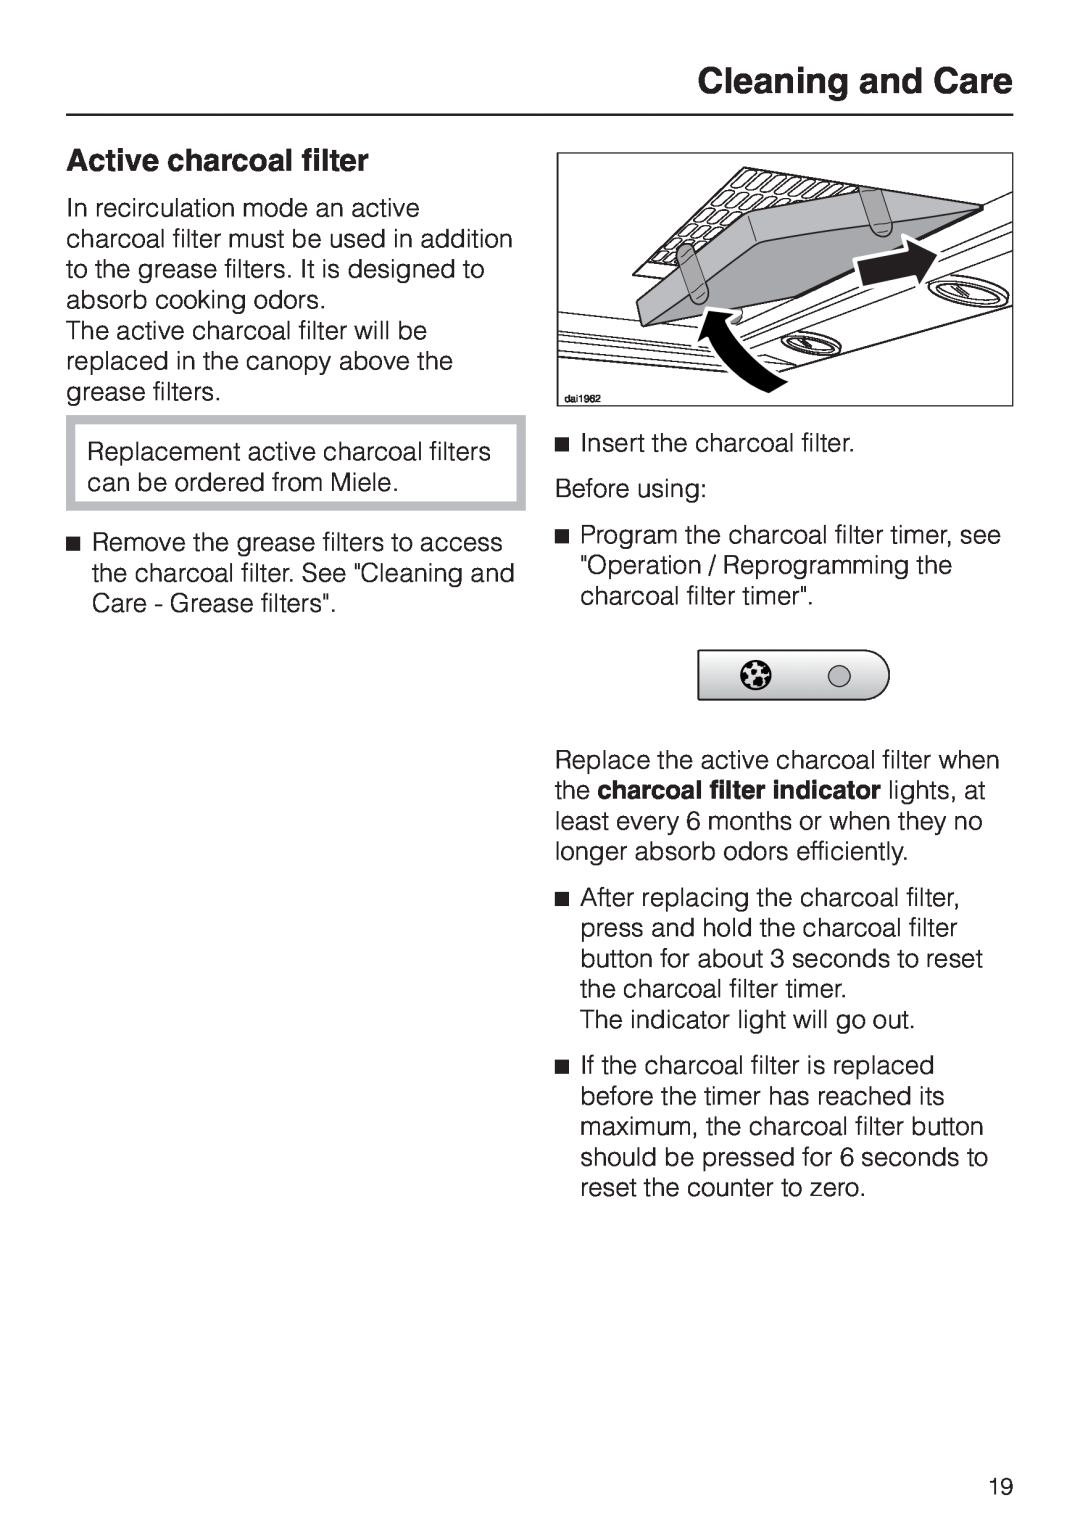 Miele DA 279-4 installation instructions Active charcoal filter, Cleaning and Care, Insert the charcoal filter 